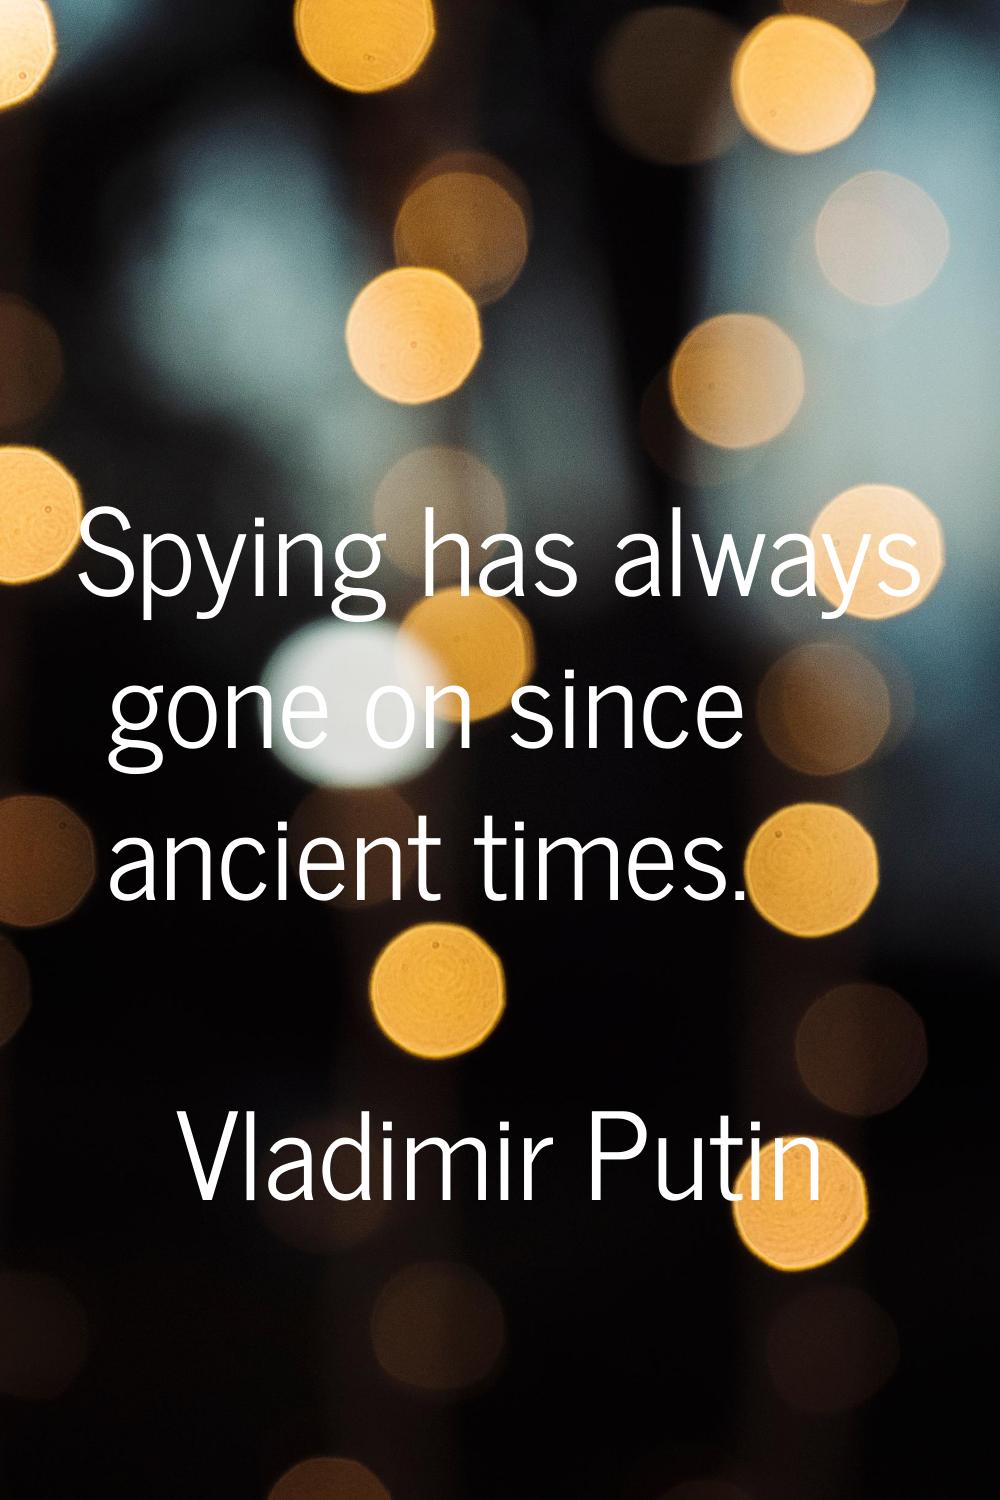 Spying has always gone on since ancient times.